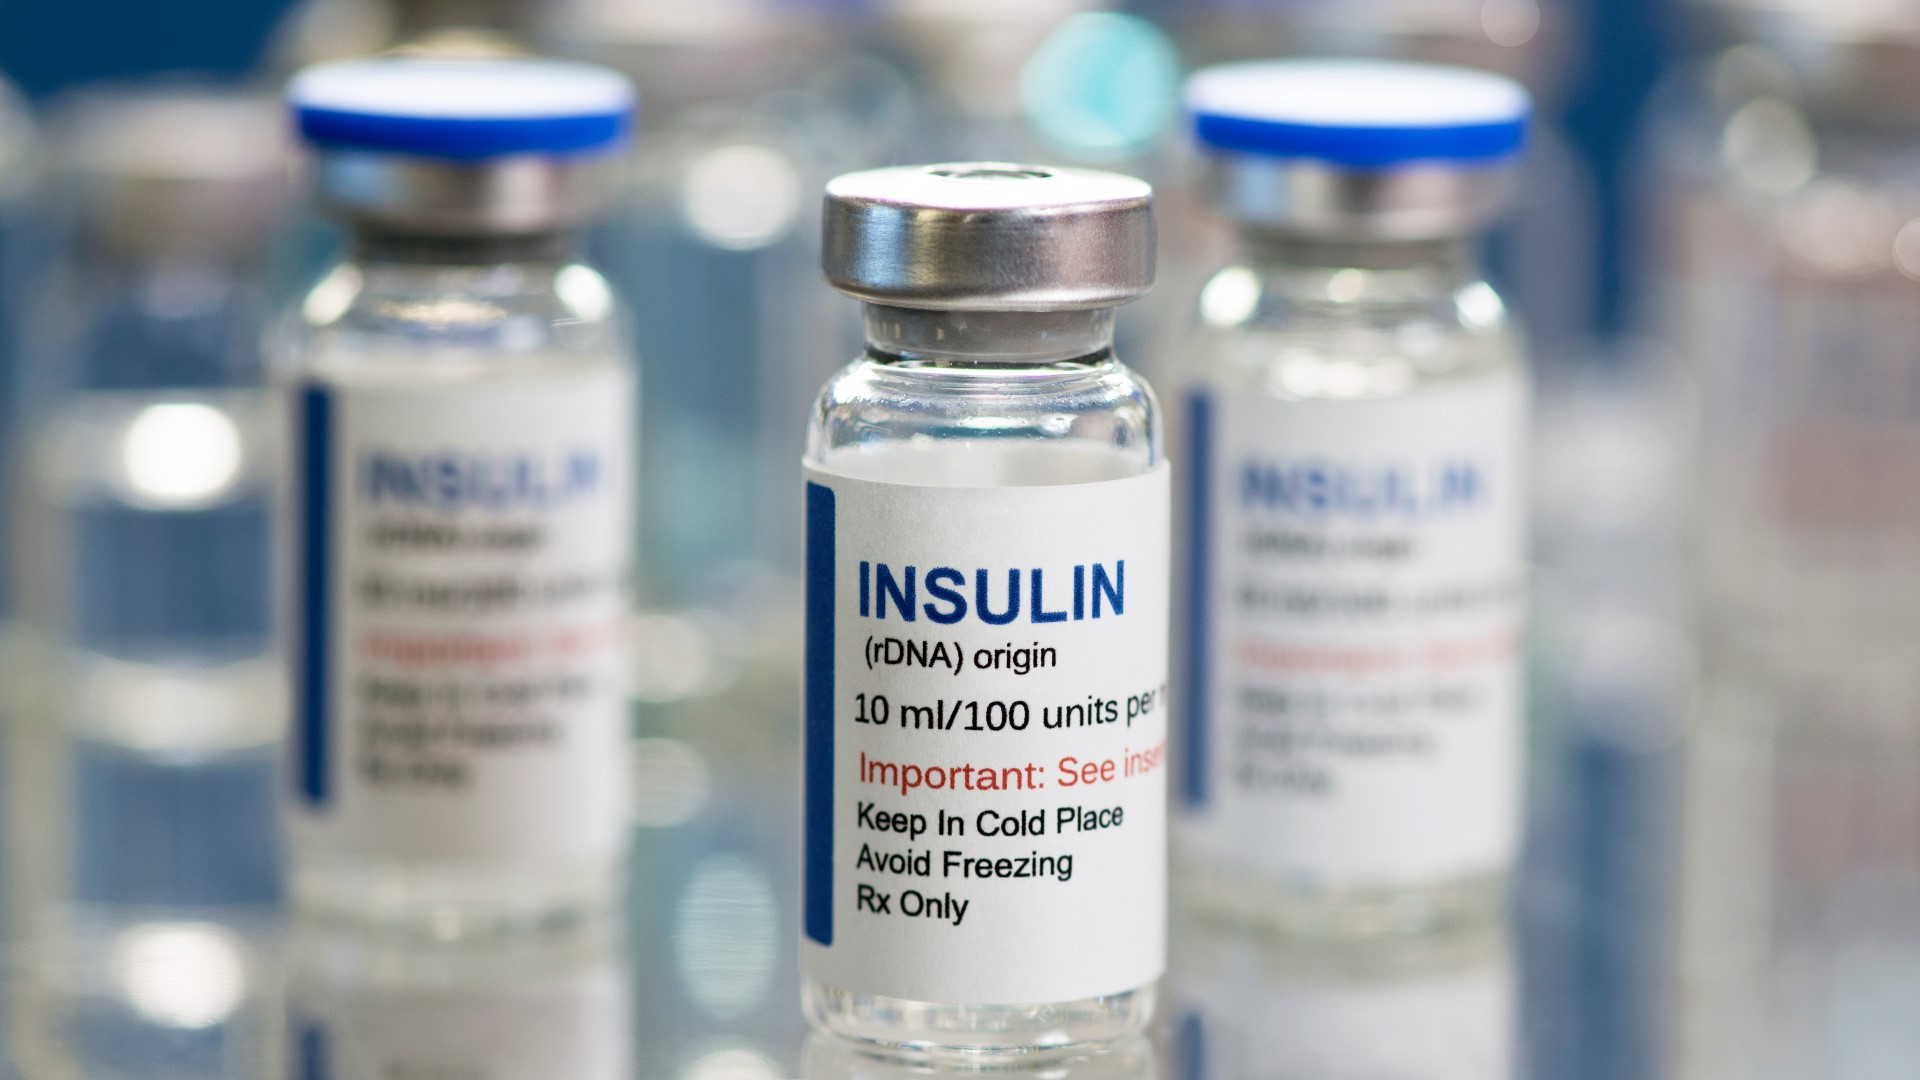 The lawsuit accuses several drug manufacturers of conspiring to inflate the price of insulin.